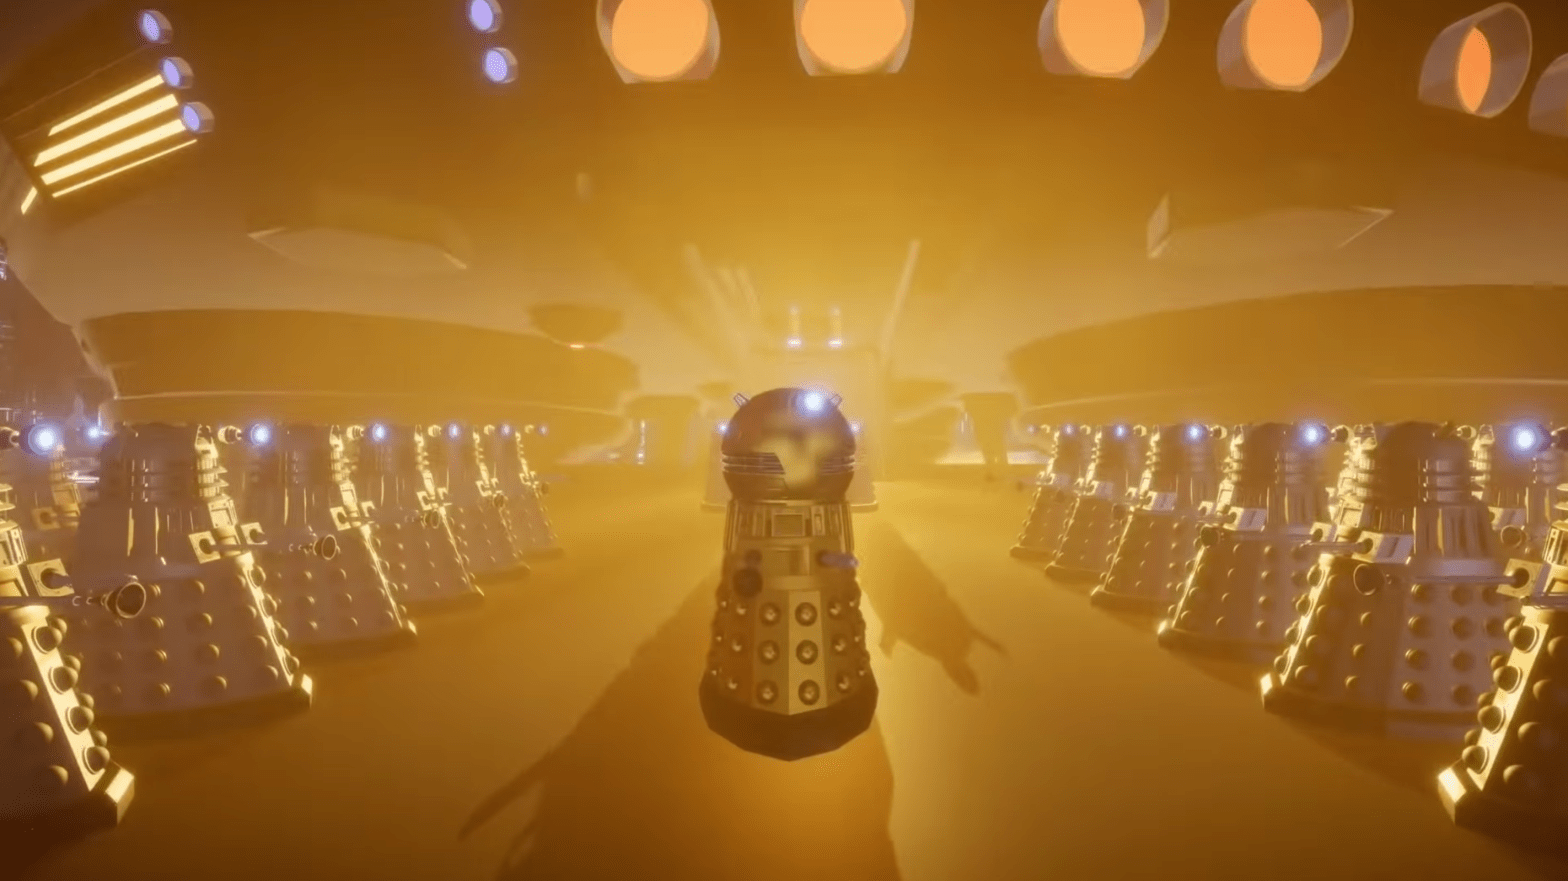 You know the thing the Daleks do. Here they are presumably doing it.  (Image: BBC Studios)